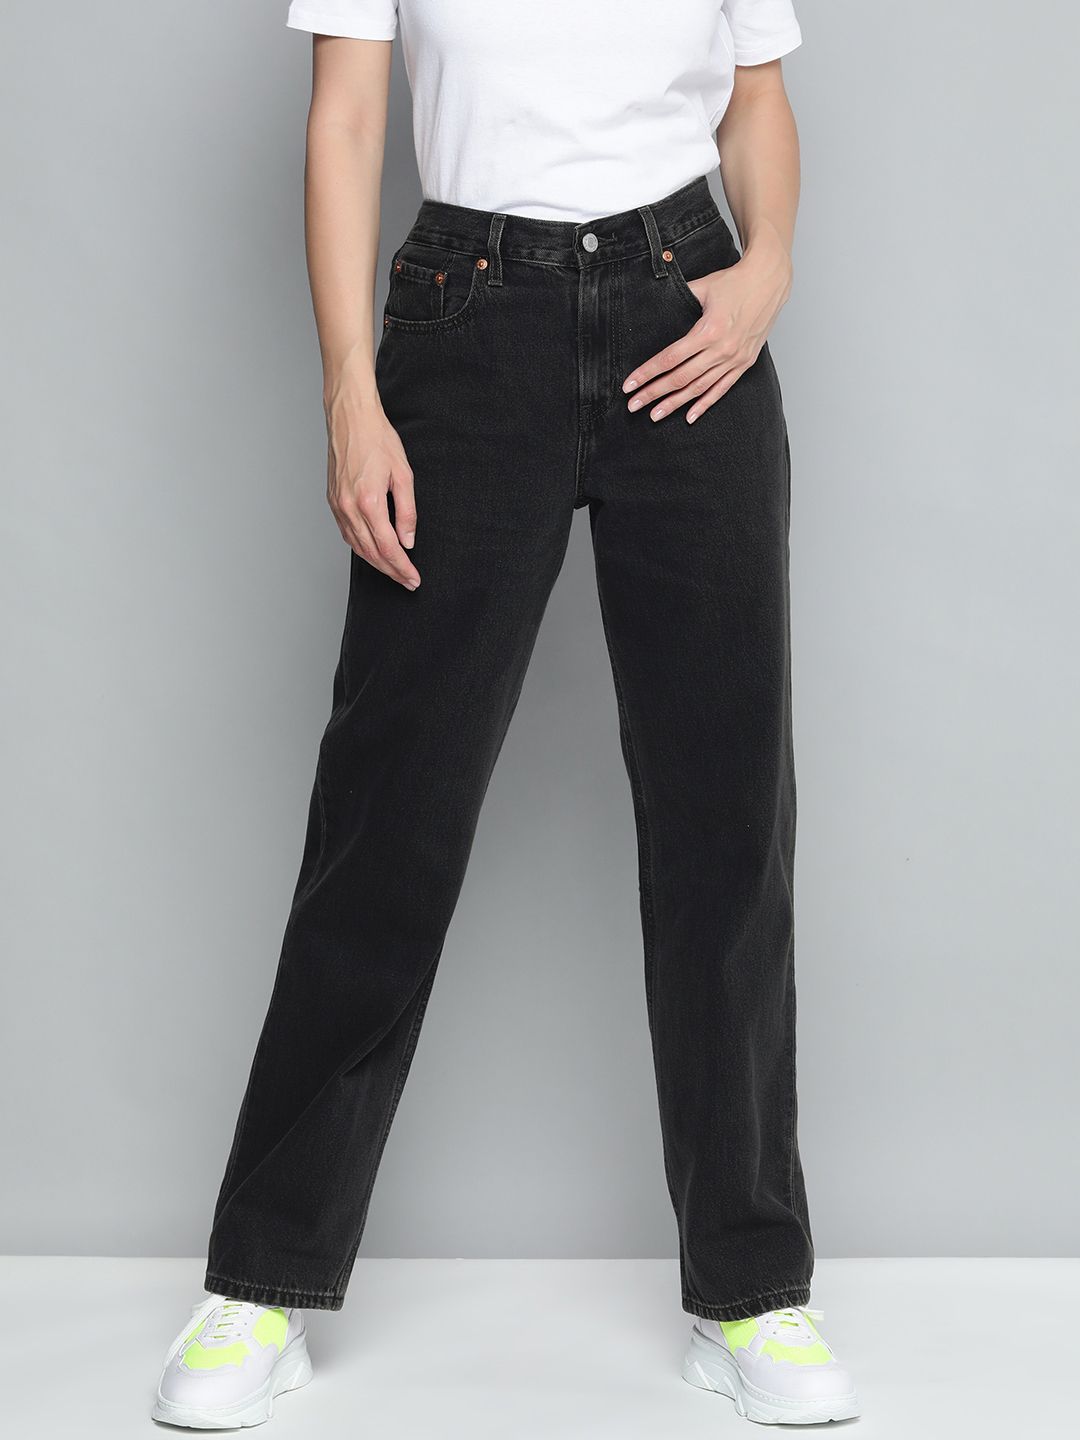 Levis Women Black Solid Low Pro Regular Fit Casual Jeans Price in India